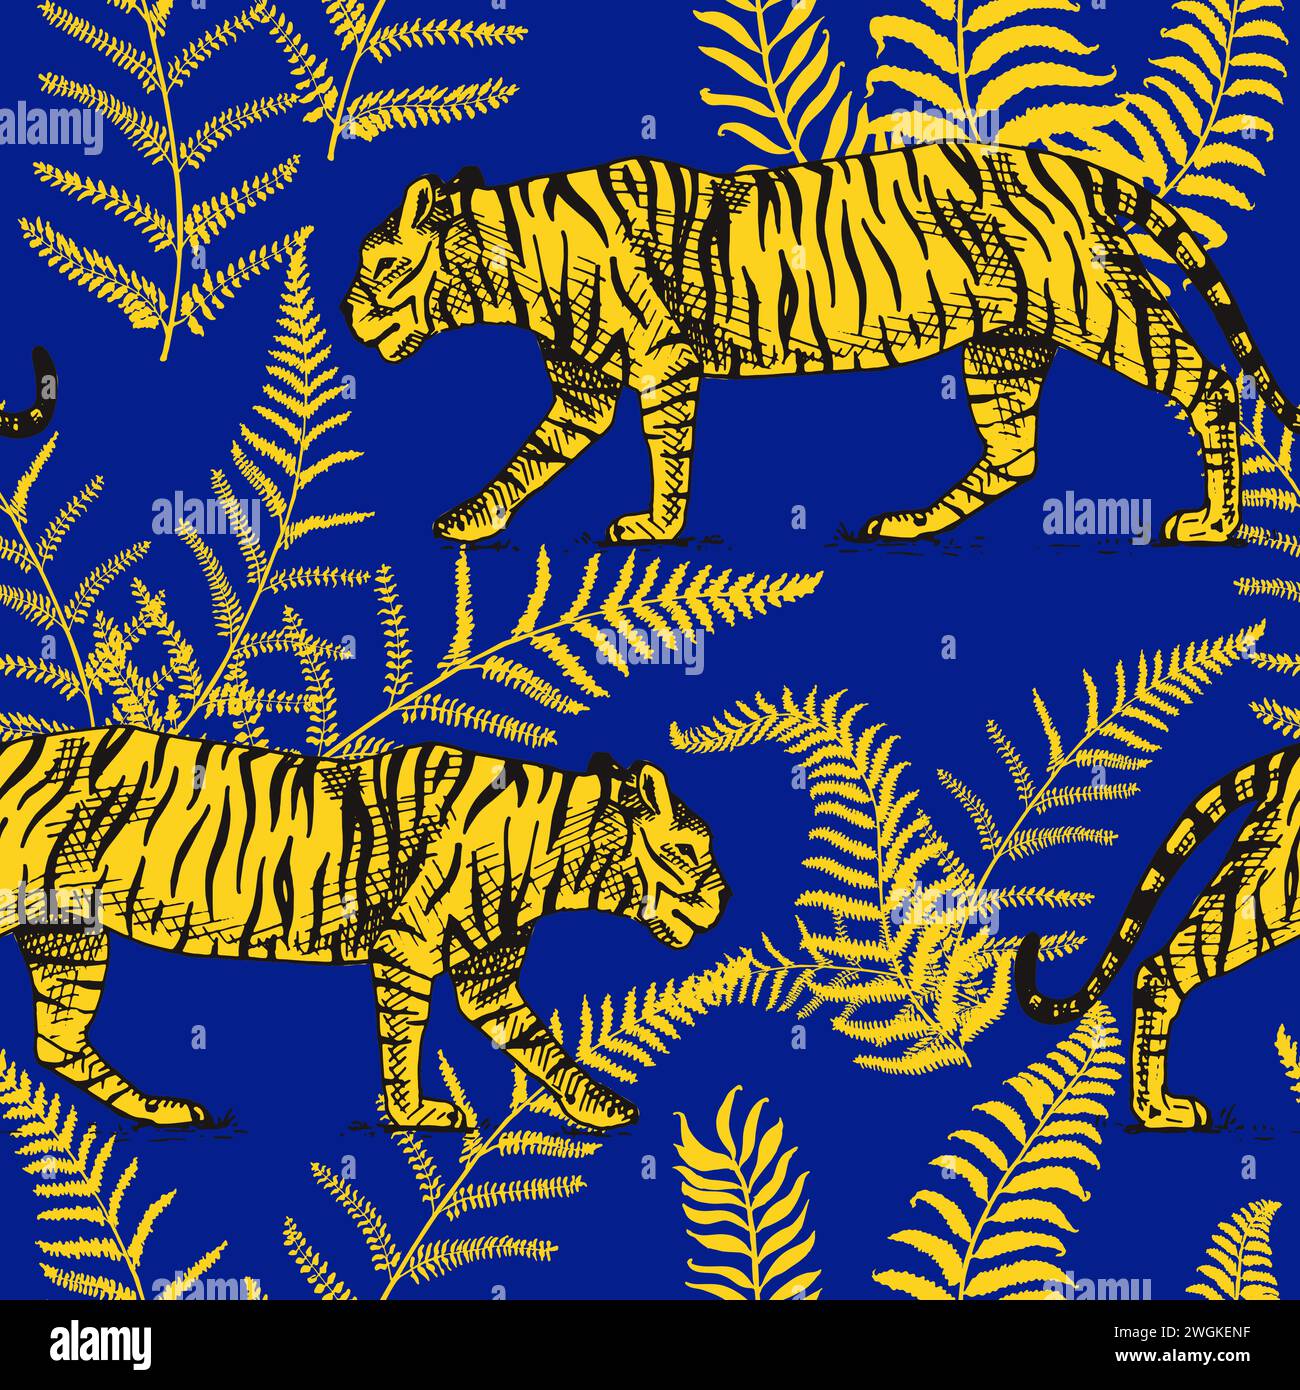 Japanese tigers with tropical leaves. Toile de jouy jungle. Wild animal with green plants. Banner or poster for advertising or web. Stock Vector